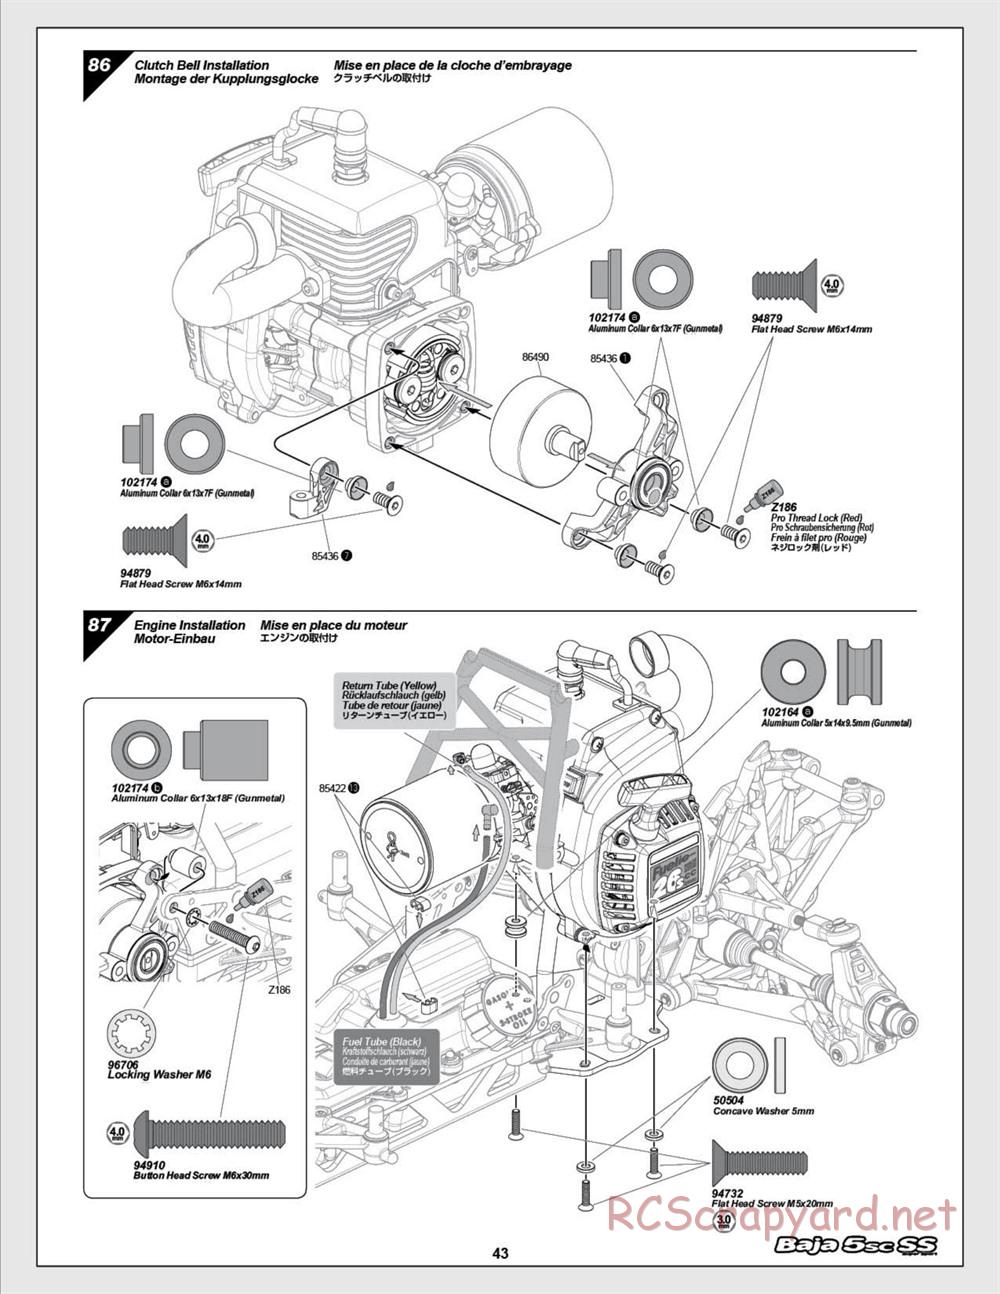 HPI - Baja 5SC SS - Exploded View - Page 43